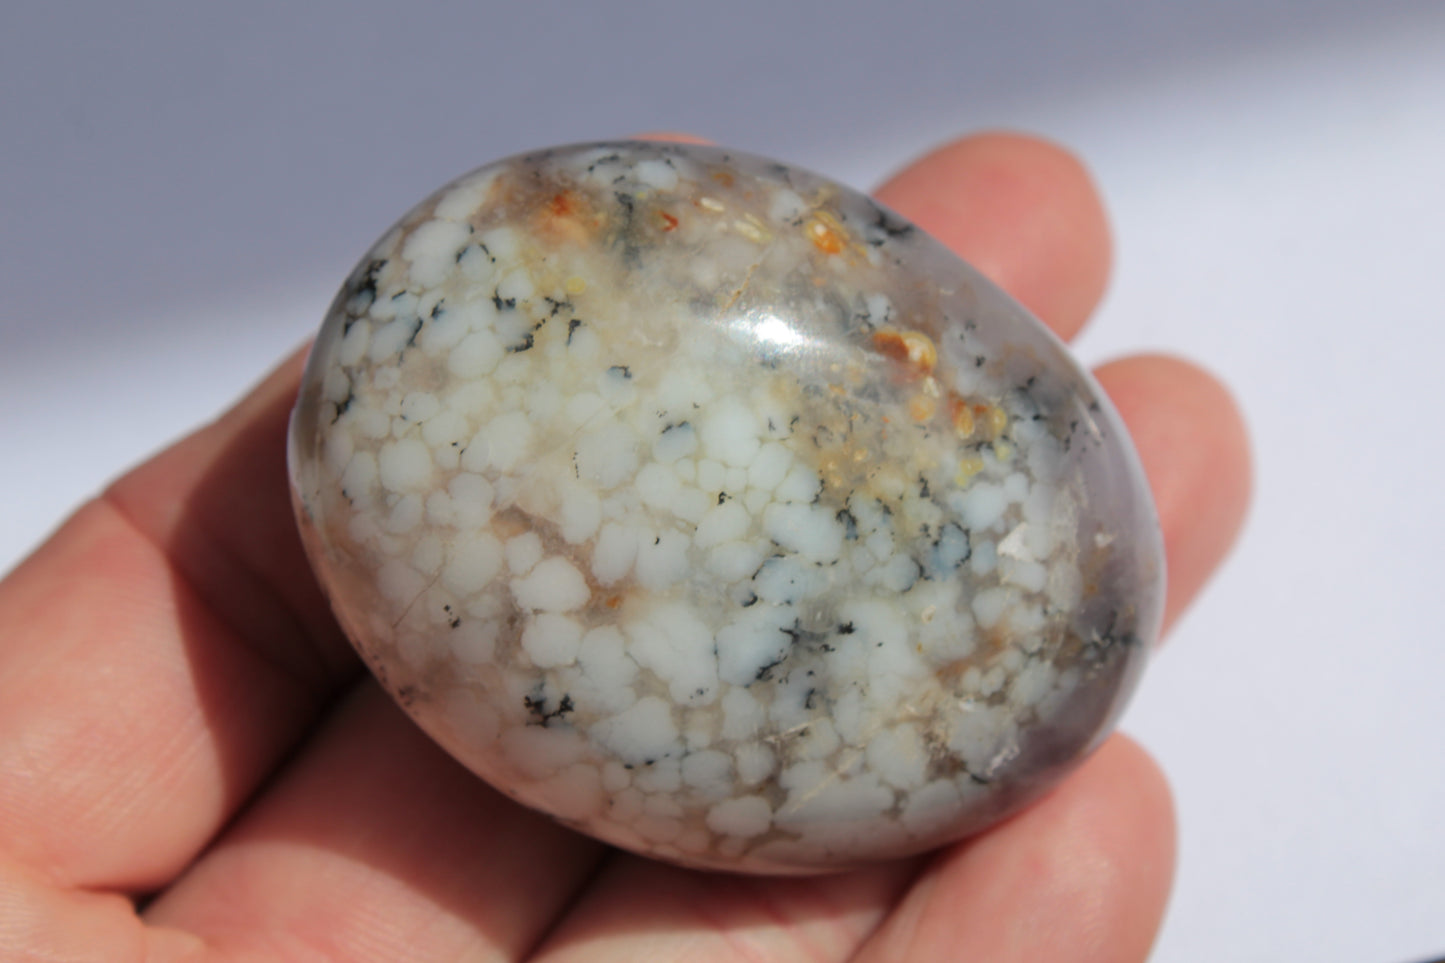 White Opal from Madagascar 82g